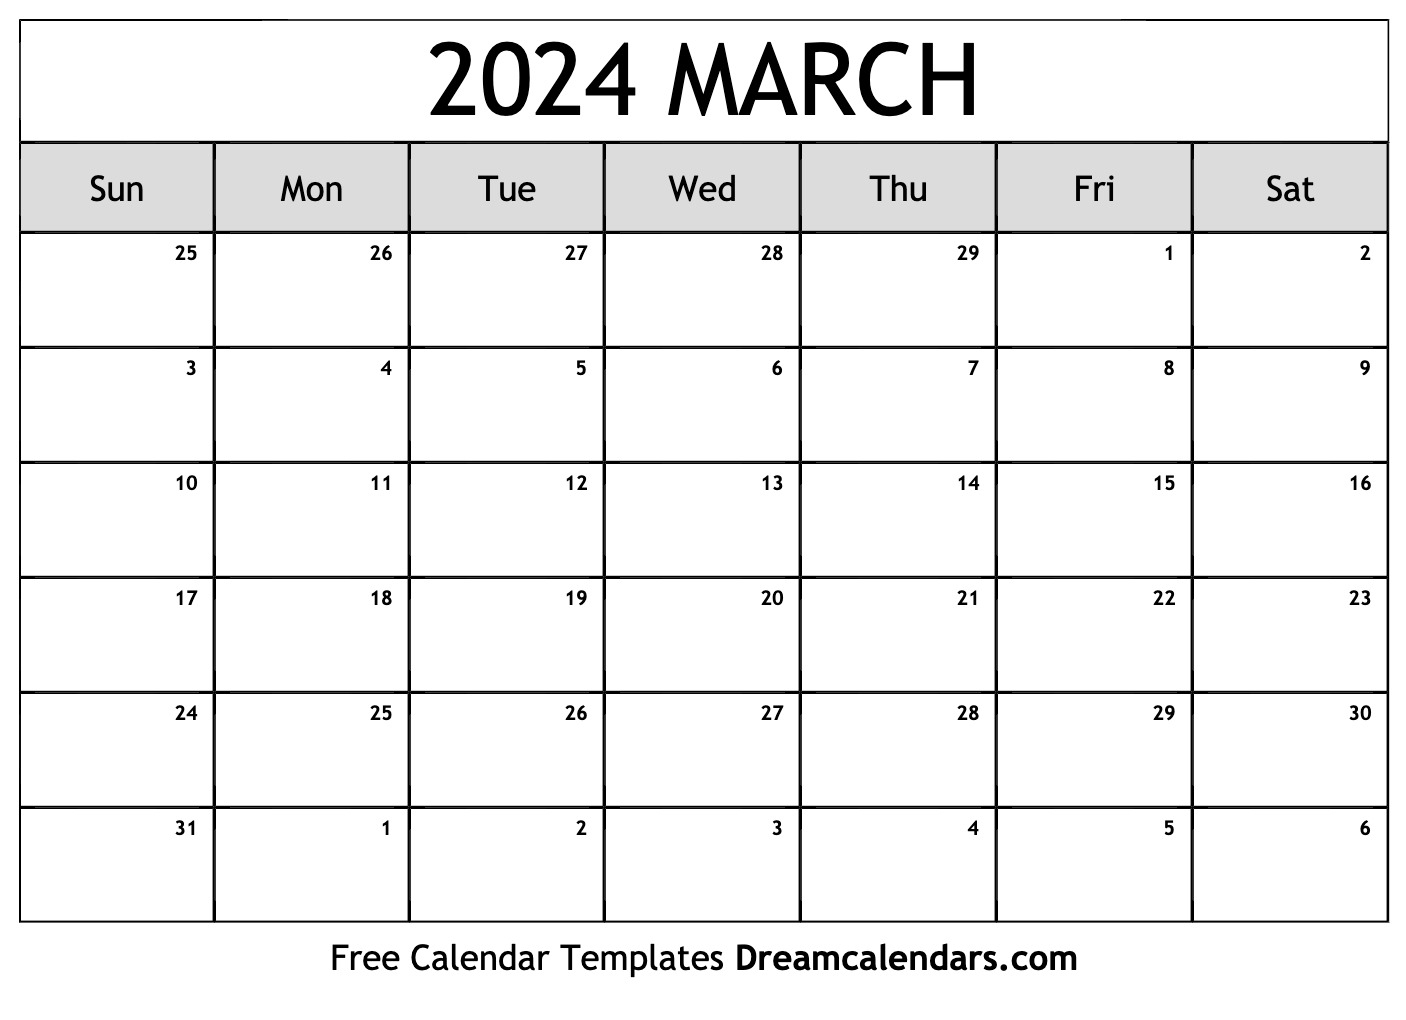 March 2024 Calendar | Free Blank Printable With Holidays for Free Printable Blank March 2024 Calendar